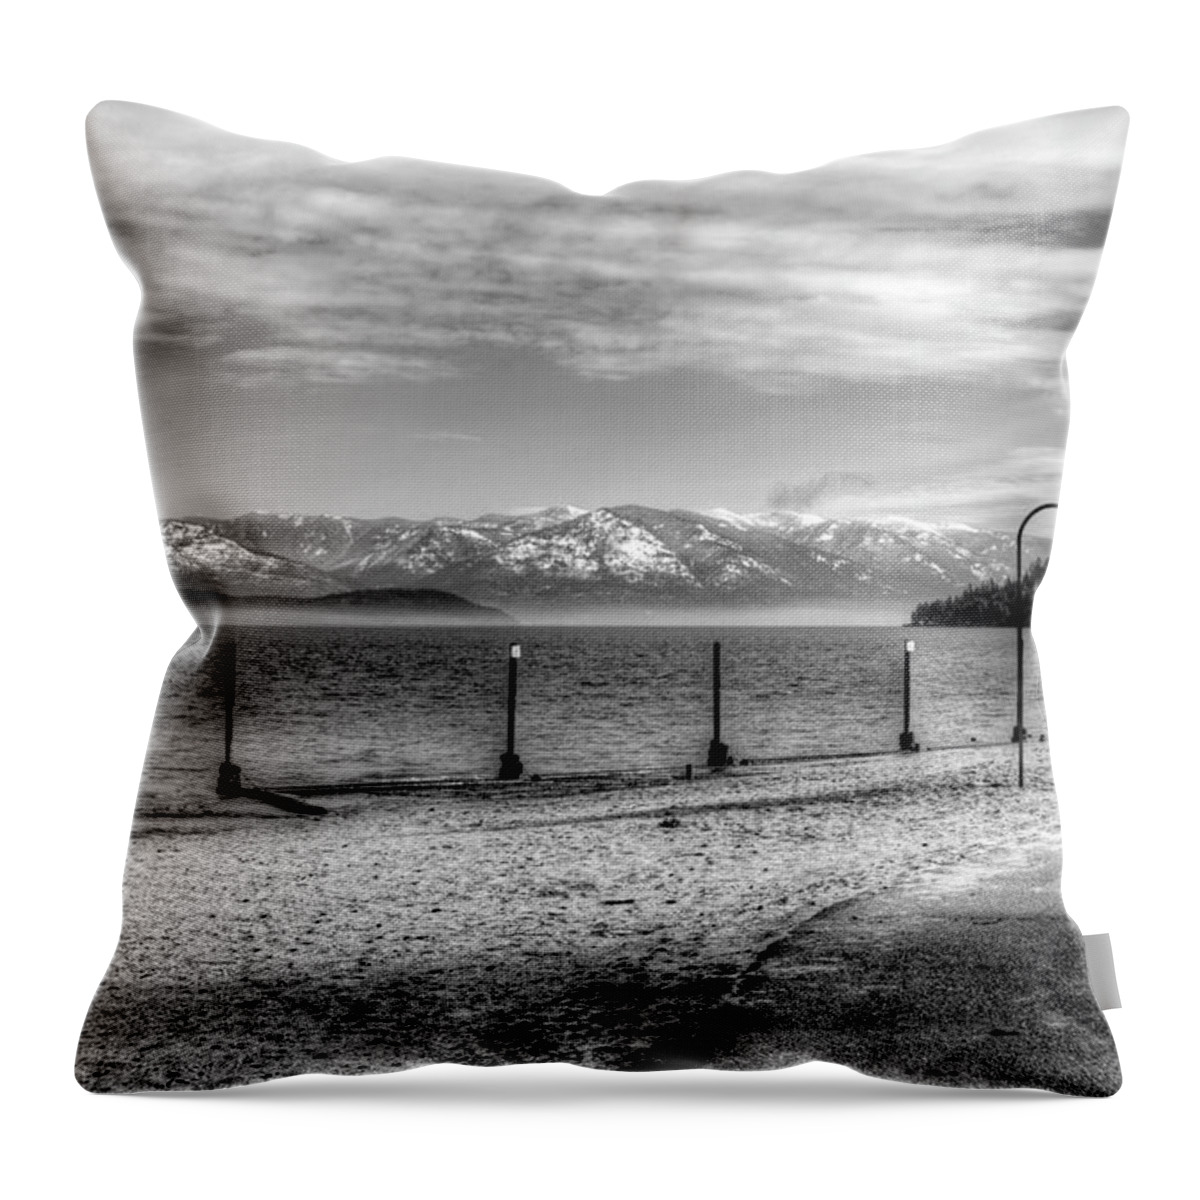 Hdr Throw Pillow featuring the photograph Sandpoint City Beach 2017 by Lee Santa